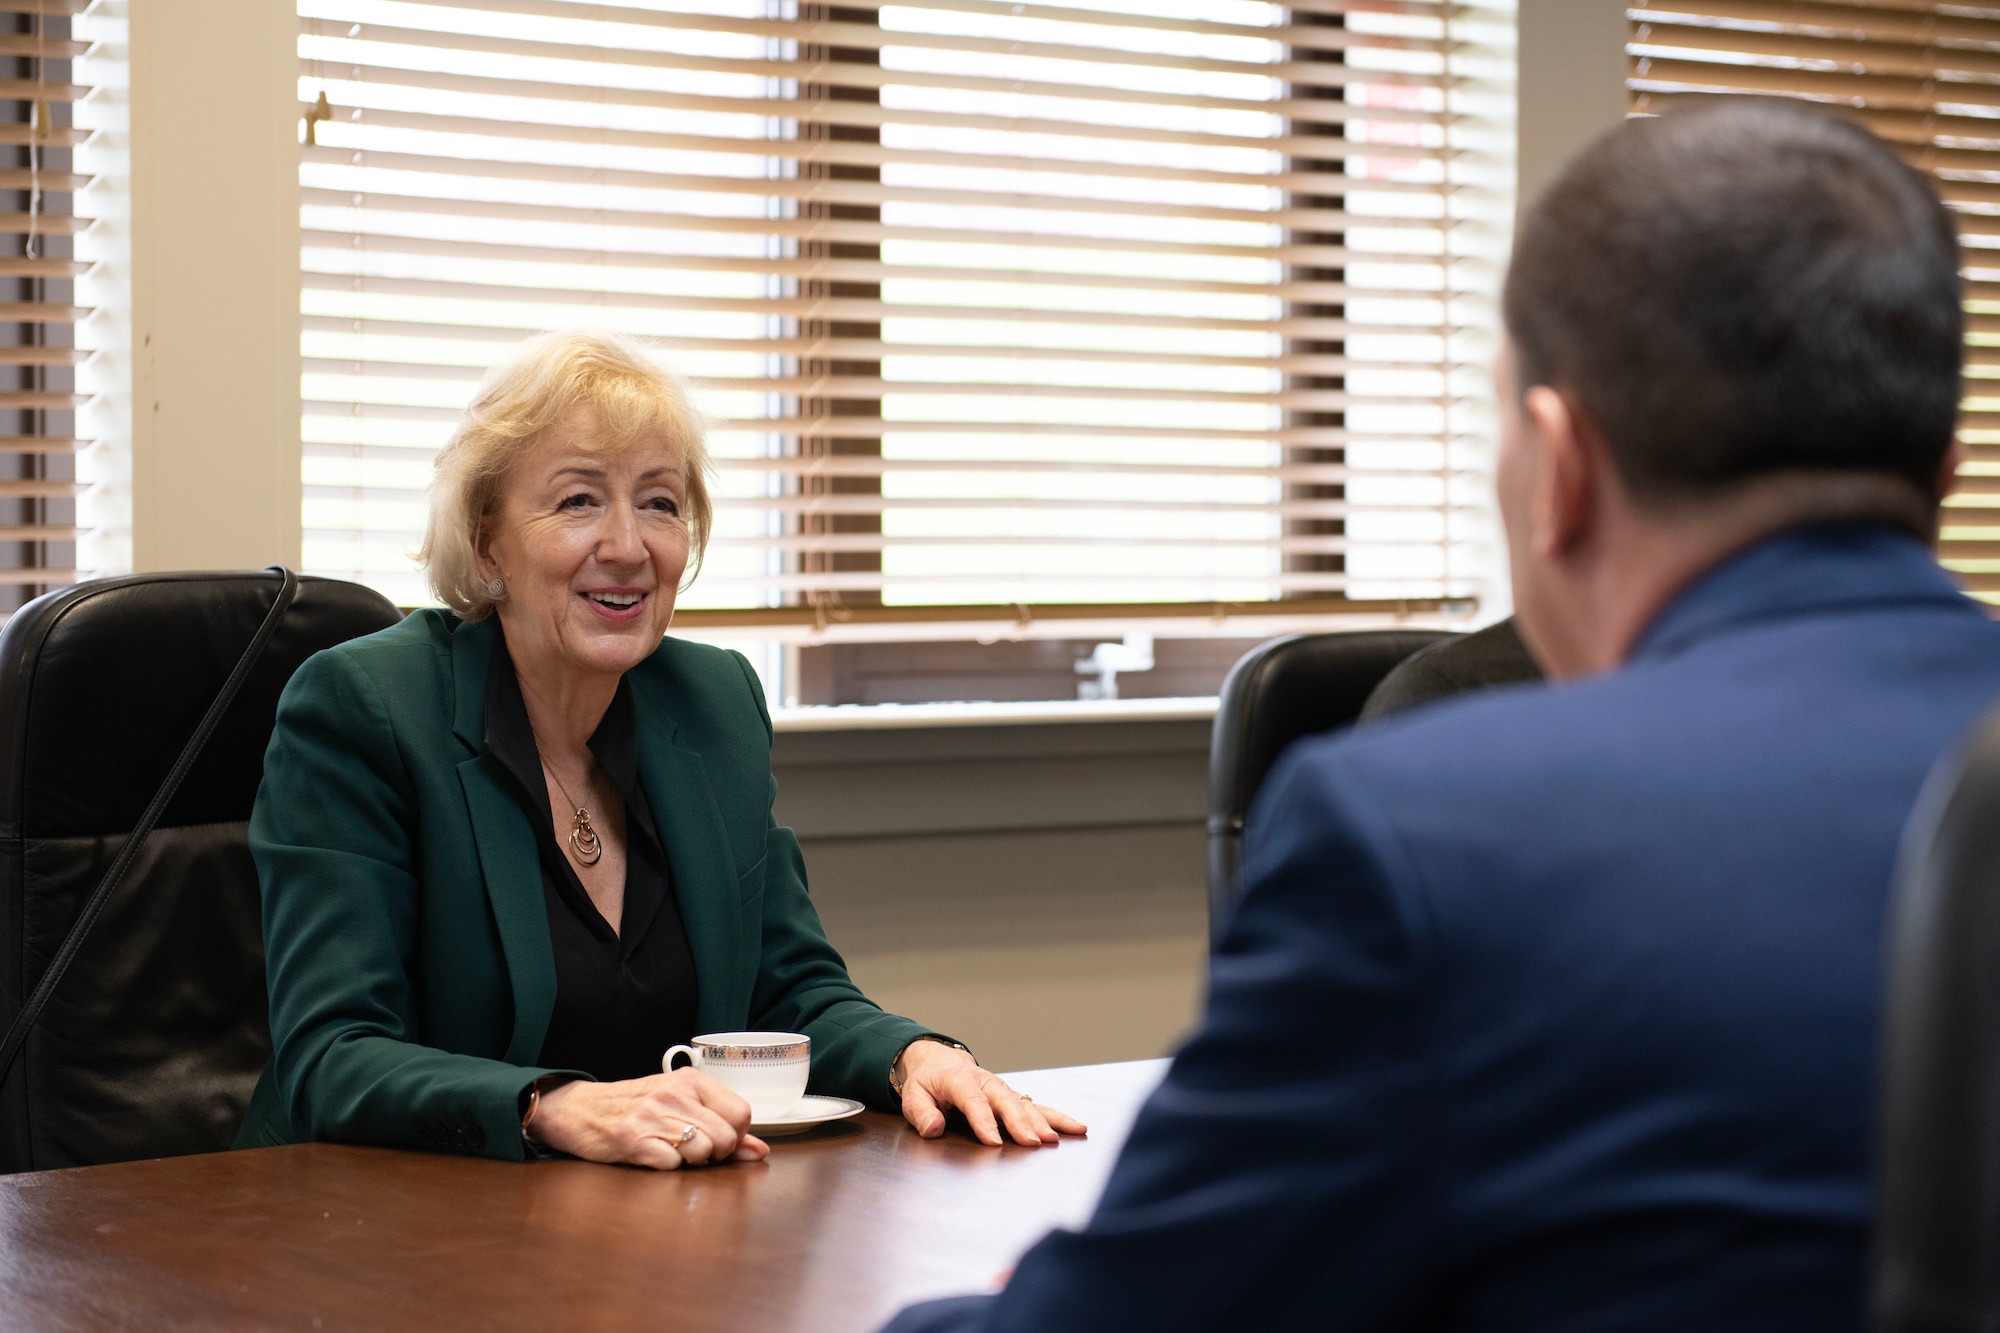 U.S. Air Force Col. Edward Spinelli, right, 422d Air Base Group commander, and Royal Air Force Sqn. Ldr. Tina Sheeran, RAF Alconbury/Croughton/Molesworth RAF commander, met Rt Hon. Dame Andrea Leadsom DBE MP, left, at RAF Croughton, England, April 27, 2023, to discuss topics of interest for the base and local communities. During the meeting they reiterated the close ties between the base and the local community and talked about schooling for the base children, housing in the local area, on base employment for U.K. nationals, and different ways the base can improve security while being as green as possible. (U.S. Air Force photo by Staff Sgt. Jennifer Zima)